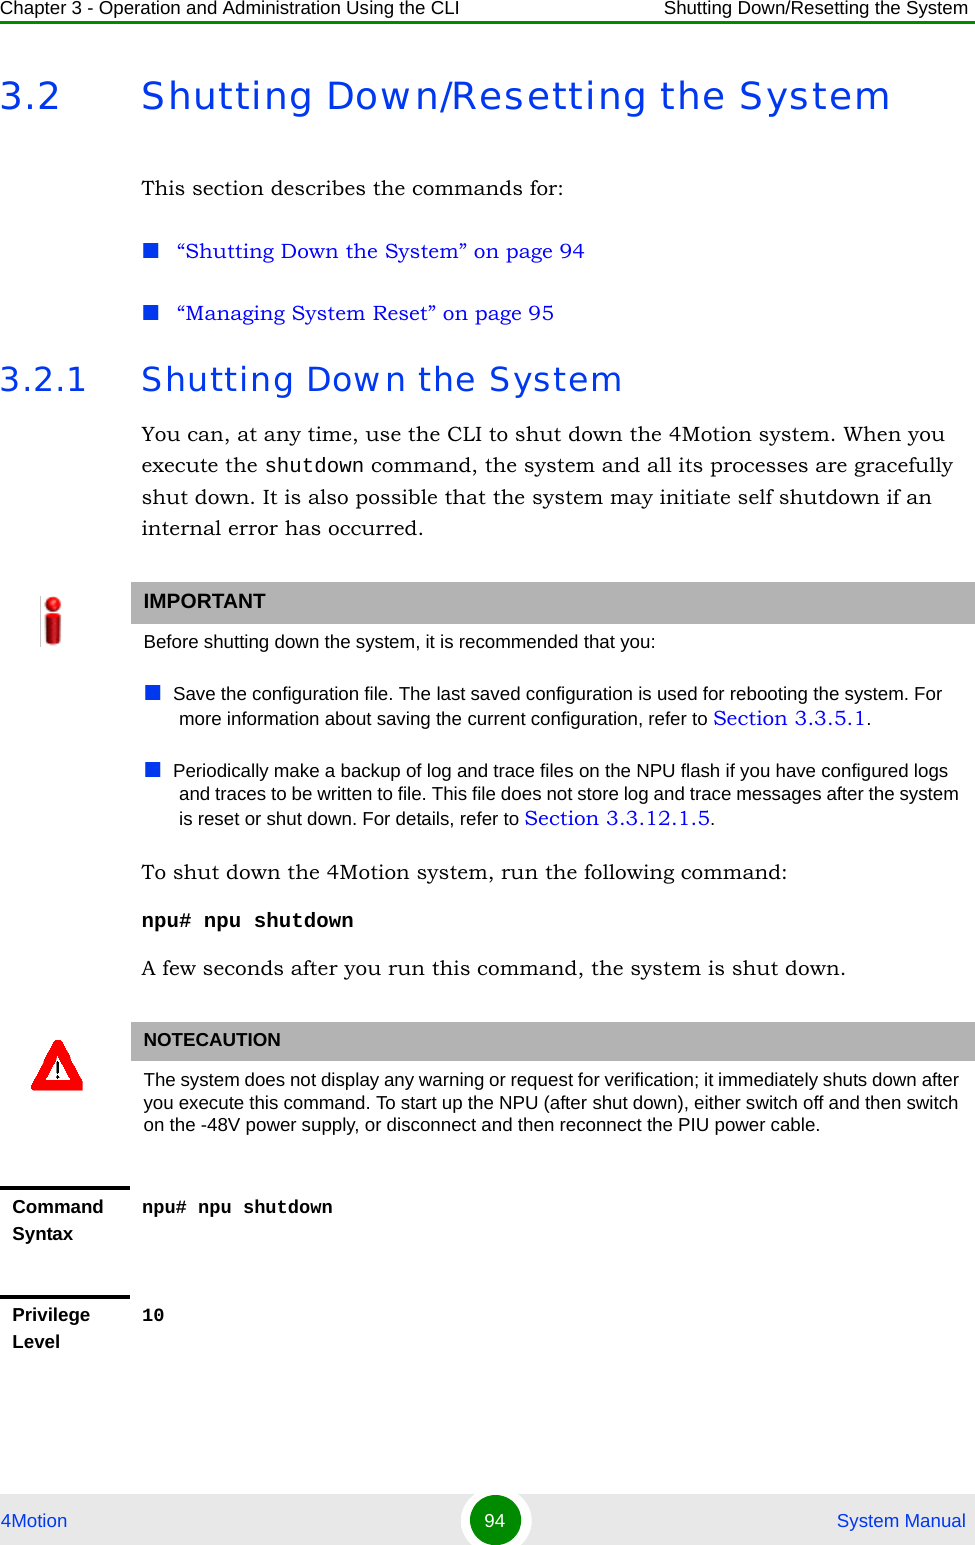 Chapter 3 - Operation and Administration Using the CLI Shutting Down/Resetting the System4Motion 94  System Manual3.2 Shutting Down/Resetting the SystemThis section describes the commands for:“Shutting Down the System” on page 94“Managing System Reset” on page 953.2.1 Shutting Down the SystemYou can, at any time, use the CLI to shut down the 4Motion system. When you execute the shutdown command, the system and all its processes are gracefully shut down. It is also possible that the system may initiate self shutdown if an internal error has occurred.To shut down the 4Motion system, run the following command:npu# npu shutdownA few seconds after you run this command, the system is shut down.IMPORTANTBefore shutting down the system, it is recommended that you:Save the configuration file. The last saved configuration is used for rebooting the system. For more information about saving the current configuration, refer to Section 3.3.5.1.Periodically make a backup of log and trace files on the NPU flash if you have configured logs and traces to be written to file. This file does not store log and trace messages after the system is reset or shut down. For details, refer to Section 3.3.12.1.5.NOTECAUTIONThe system does not display any warning or request for verification; it immediately shuts down after you execute this command. To start up the NPU (after shut down), either switch off and then switch on the -48V power supply, or disconnect and then reconnect the PIU power cable. Command Syntaxnpu# npu shutdownPrivilege Level10